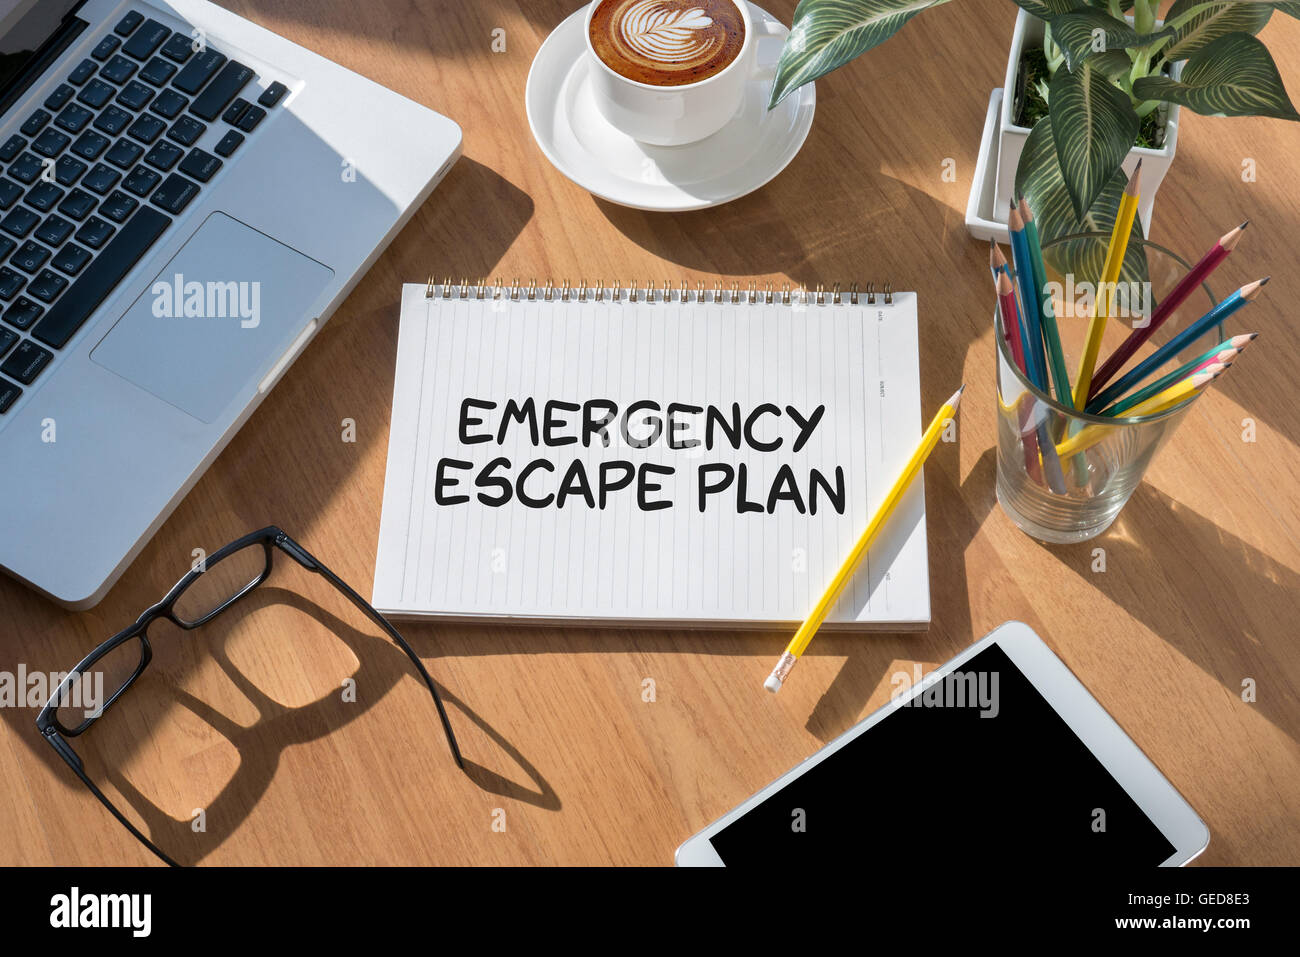 Emergency Escape Plan open book on table and coffee Business Stock Photo